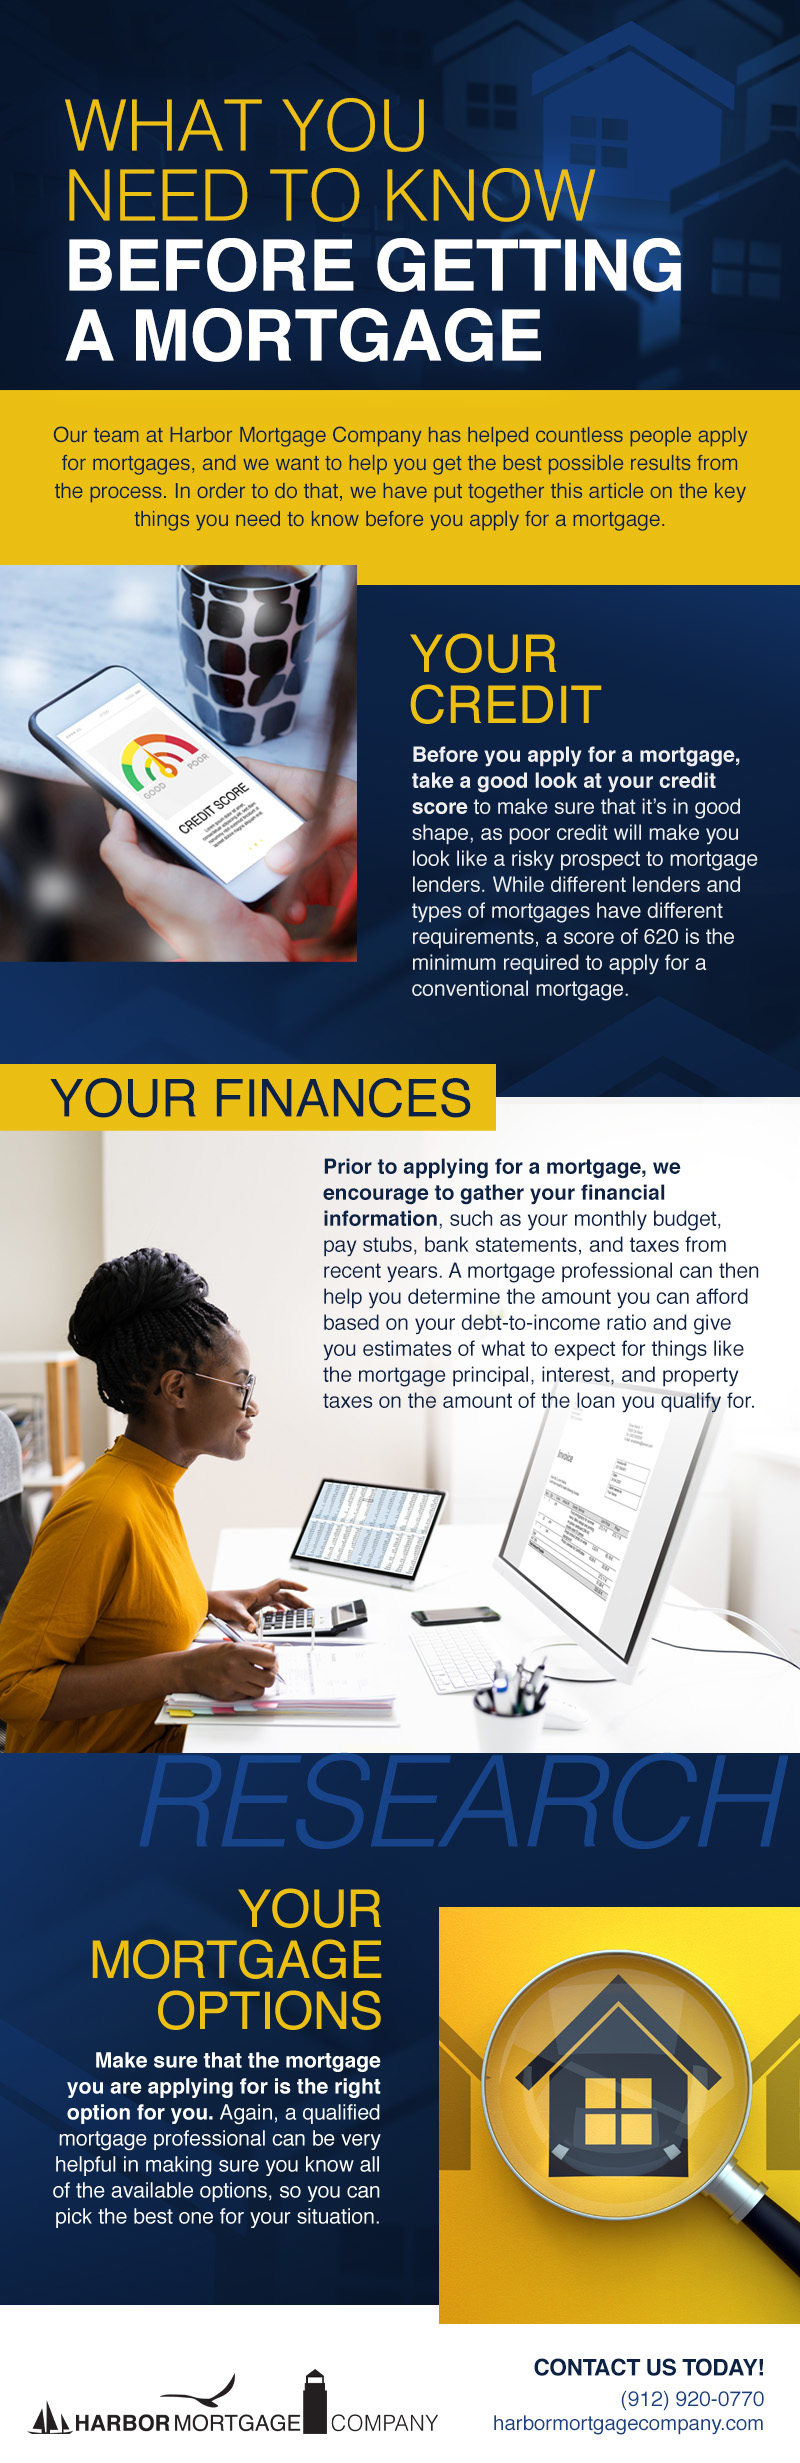 What You Need to Know Before Getting a Mortgage [infographic]